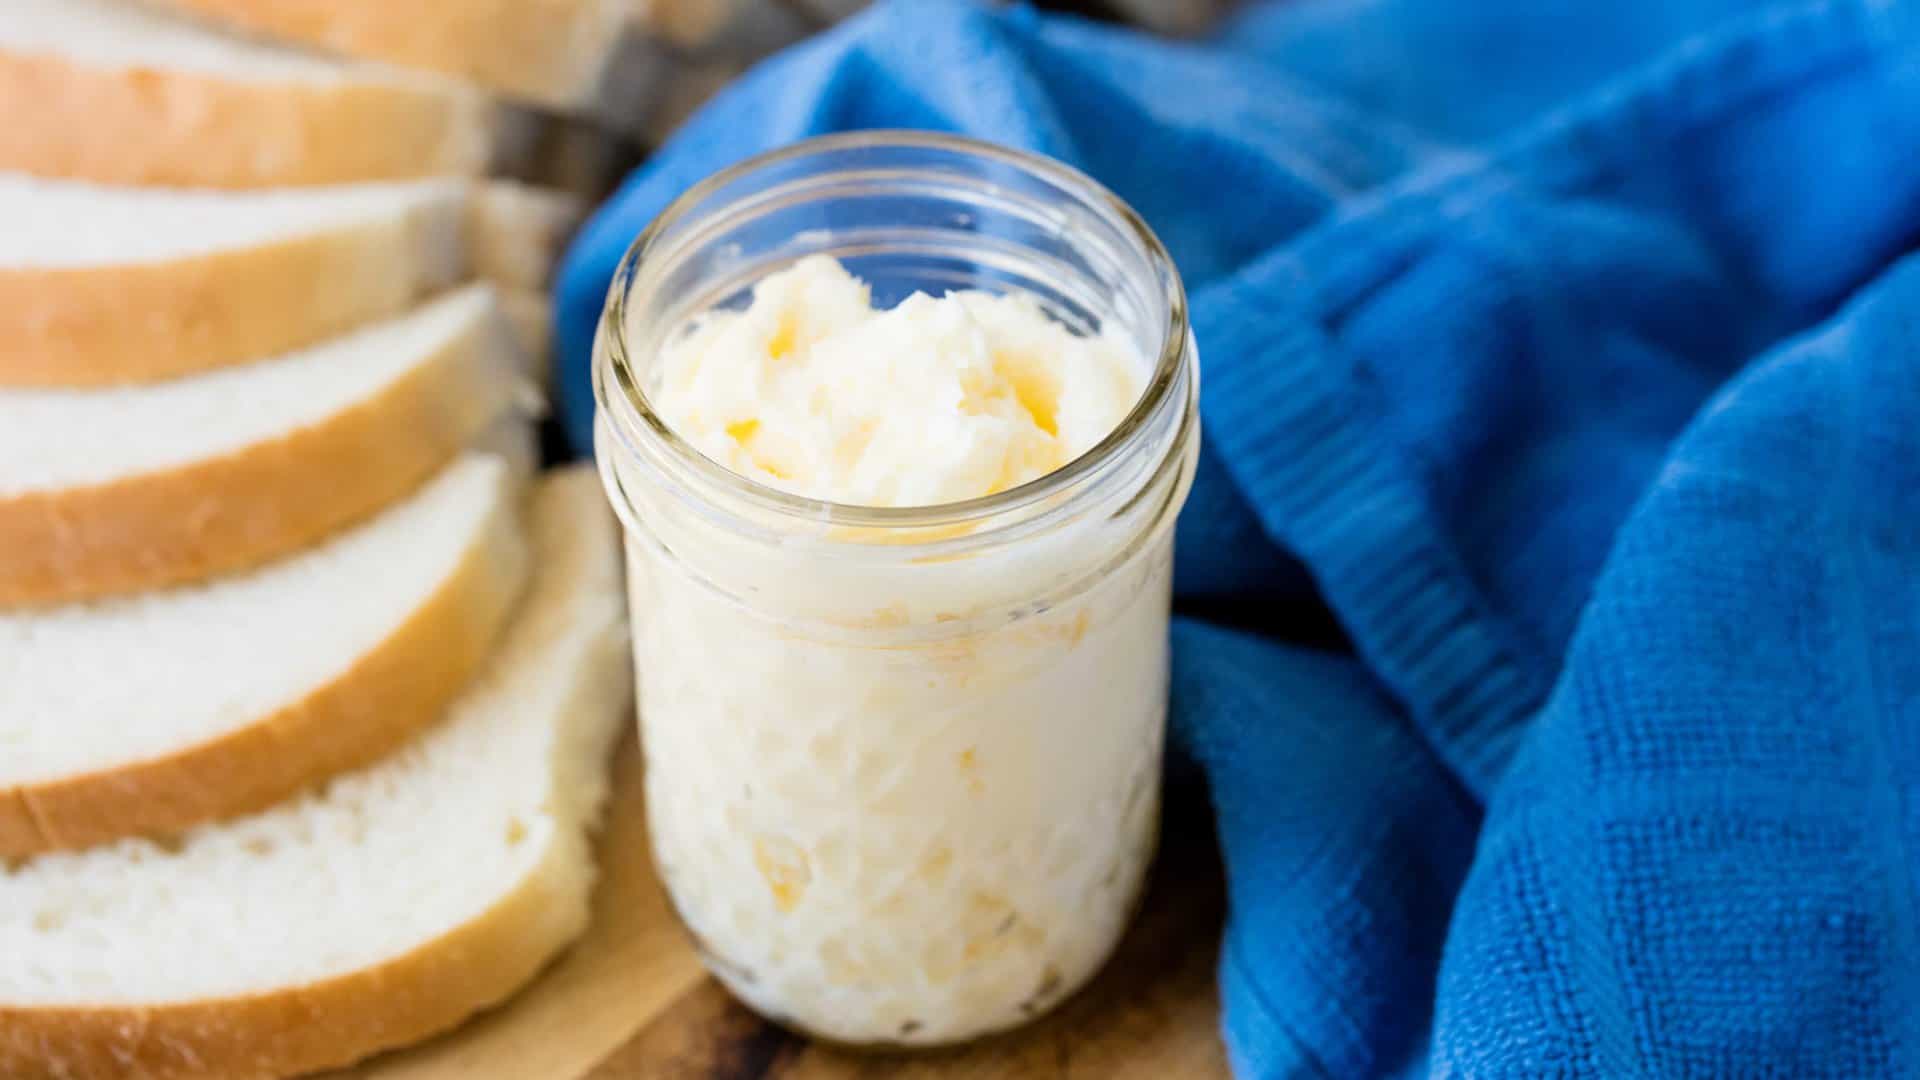 Learn how to make Homemade Butter in a Mason Jar in this fun pioneer activity for kids and adults alike! It's easy to churn your own butter and make your own buttermilk!